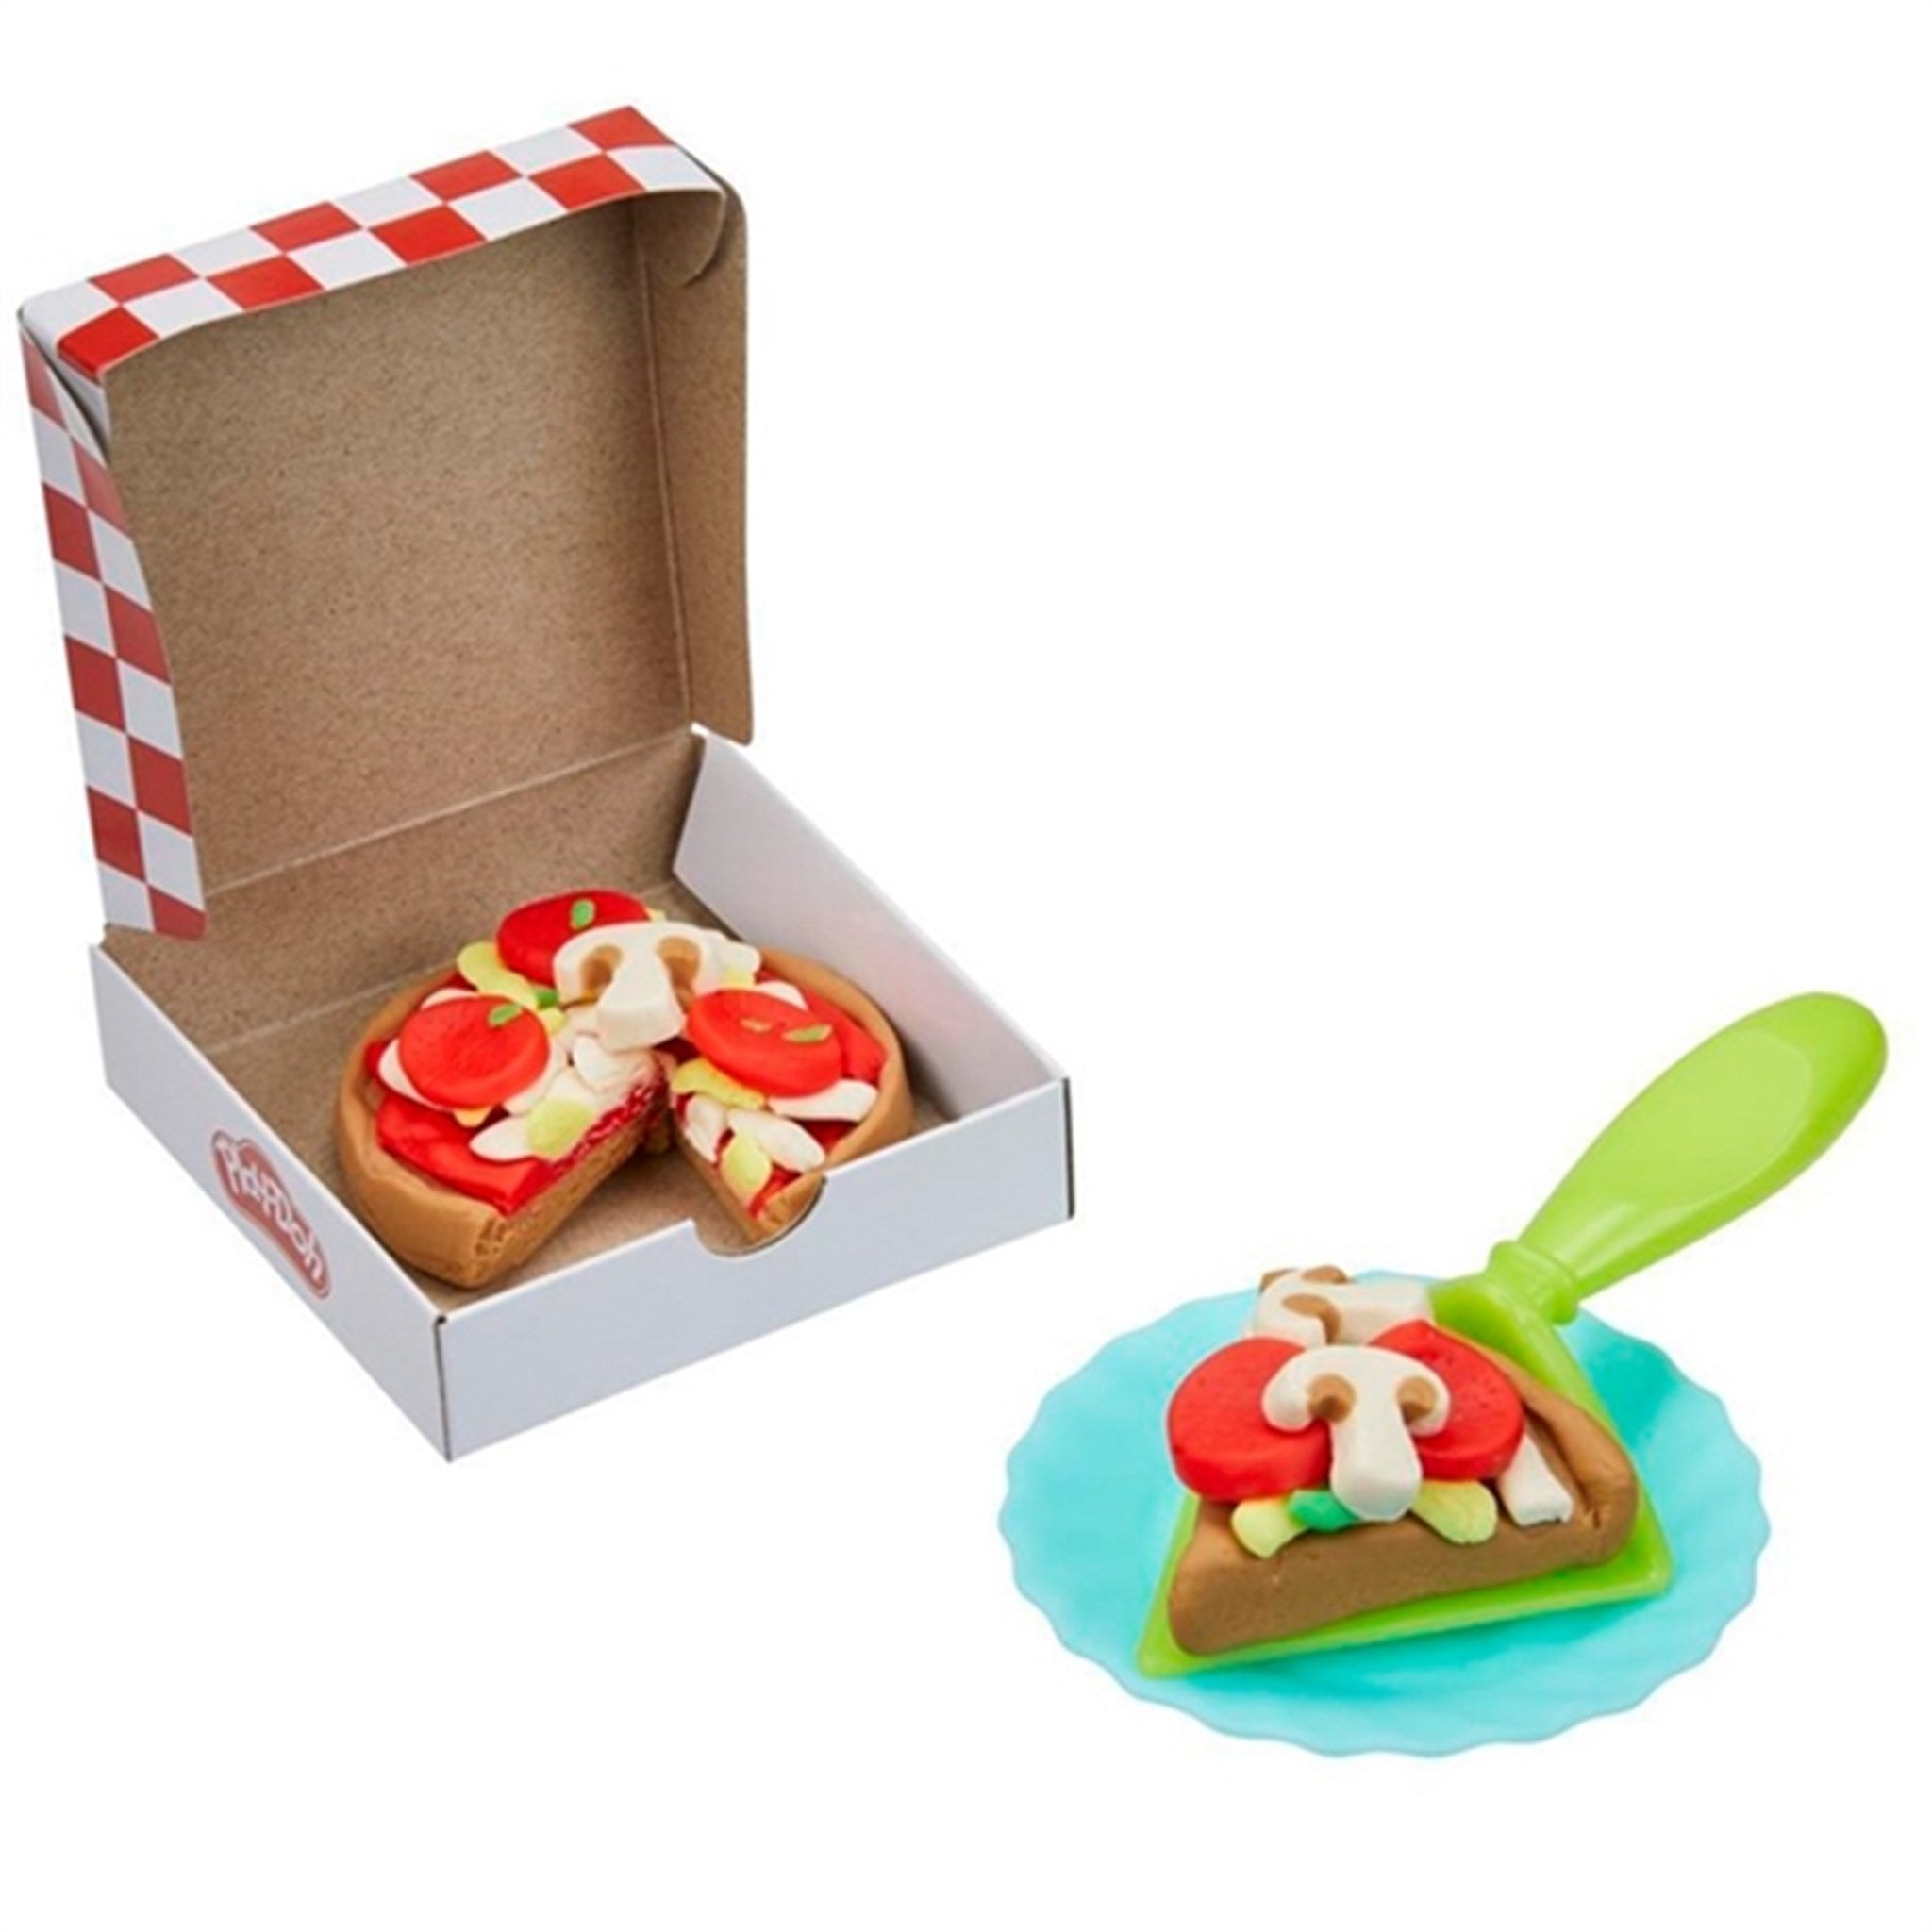 Play-Doh Kitchen Creation - Pizza Oven Playset 8